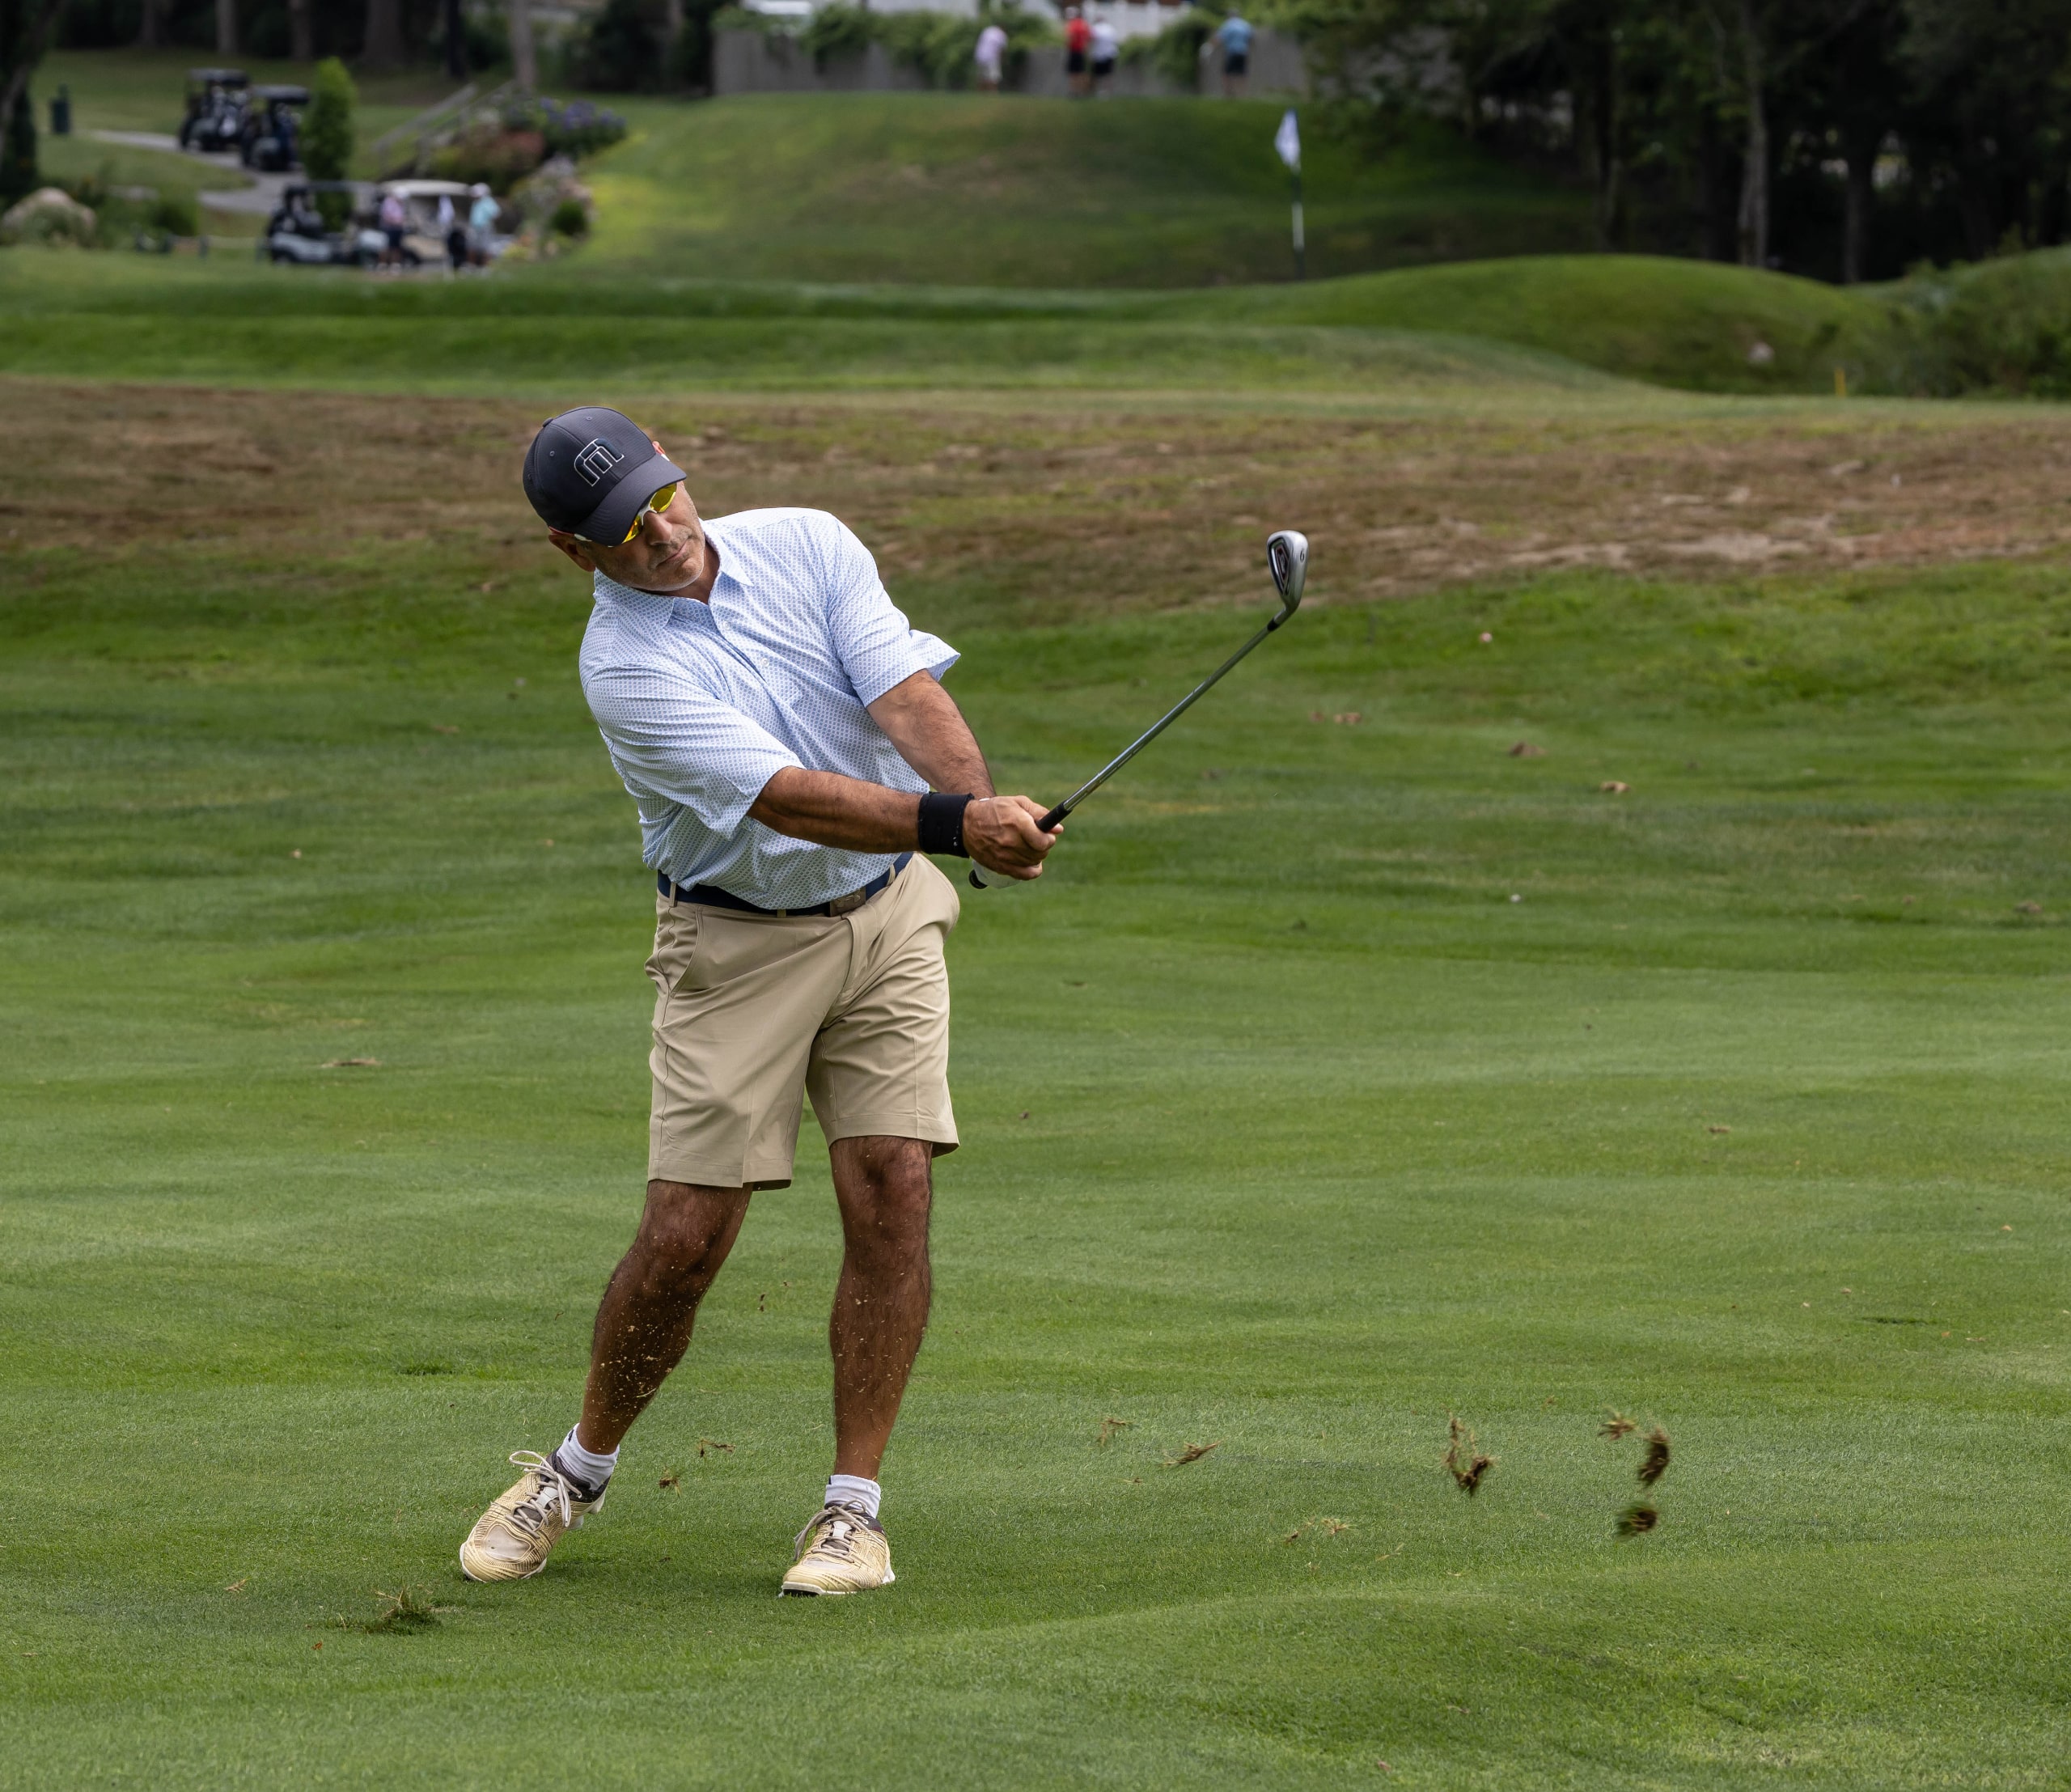 Country-Club-Of-New-Bedford FB-2023-Mens-FB-Gallery August-2023-Country-Club-Of-New-Bedford-FB-2023-Mens-FB-Gallery August-2023-Mens-FB-Gallery-Thursday-Photos-Image-25